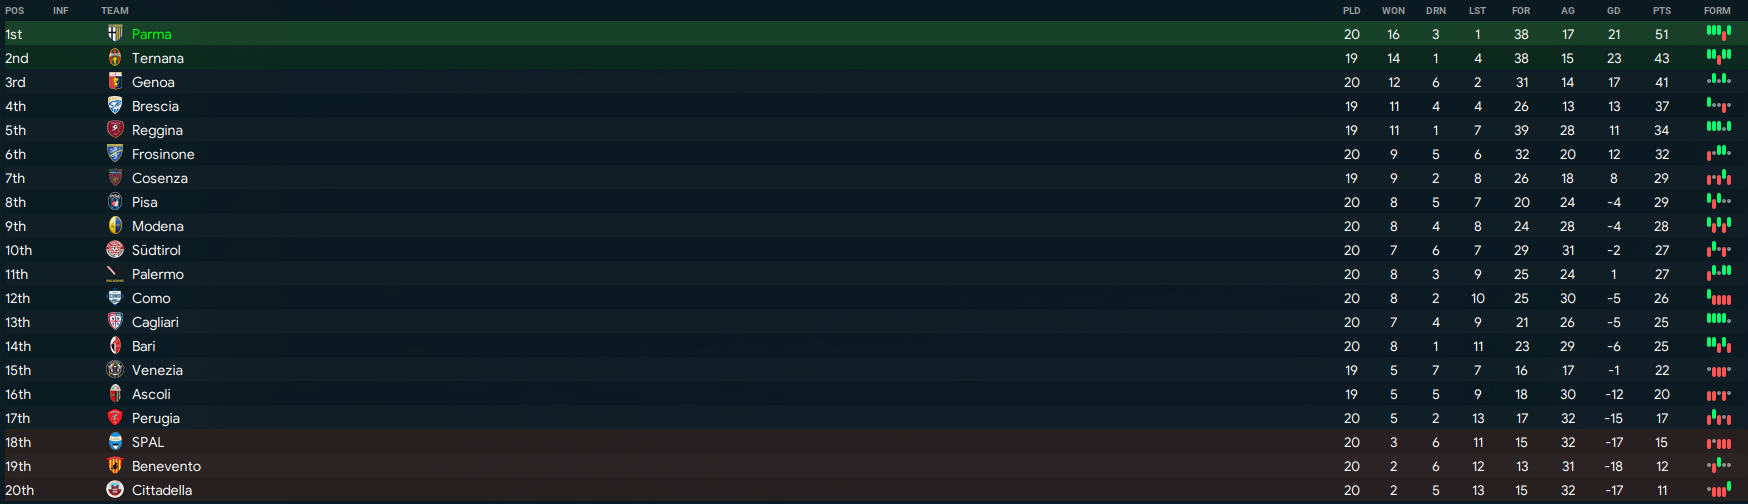 My first season in Football Manager with Parma in Serie B